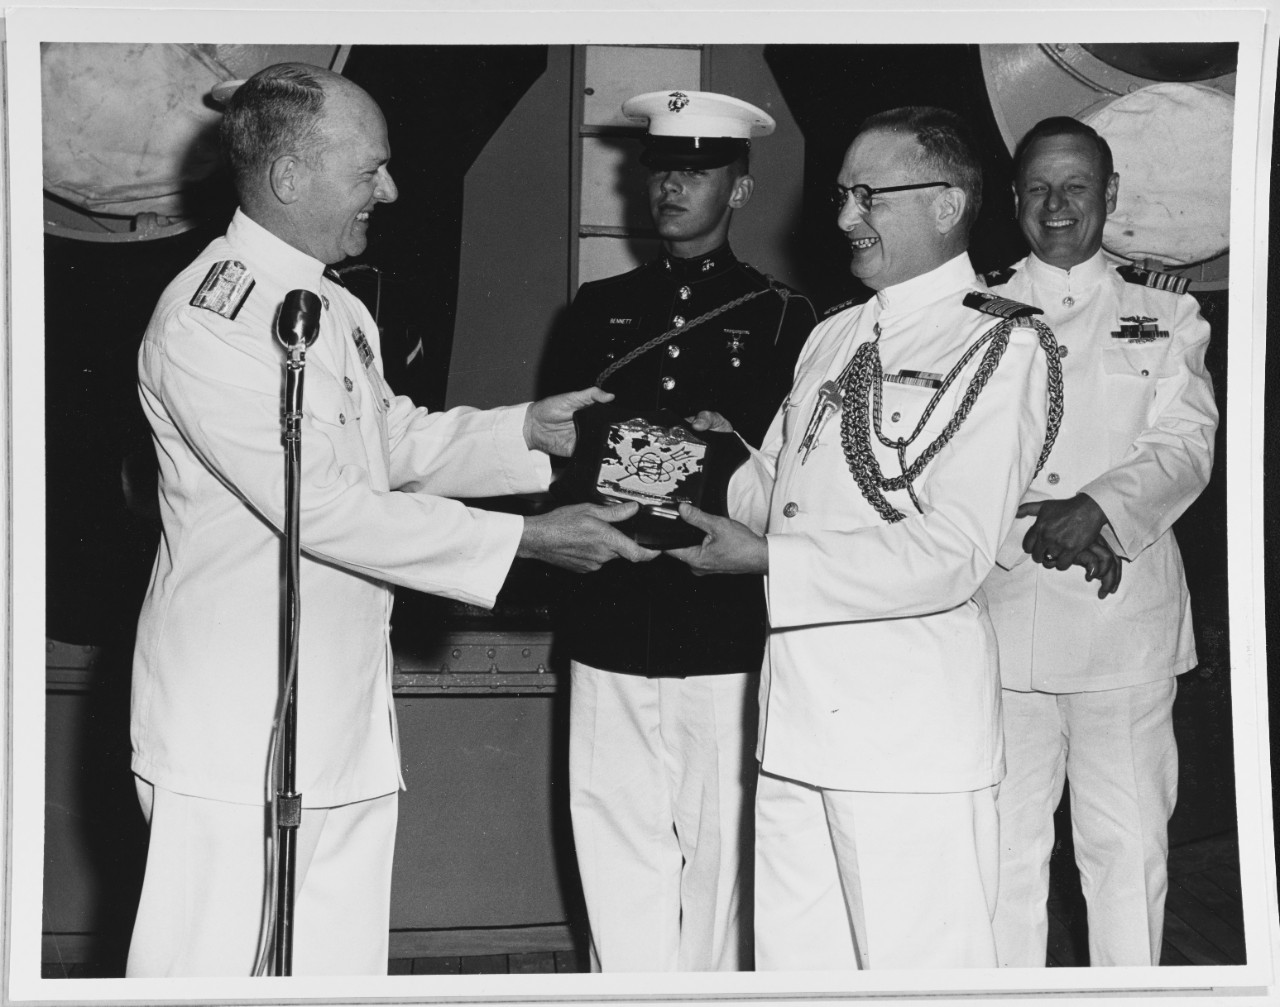 USS PORTLAND Memorial. Captain Anderson receives plaque from Vice Admiral Taylor, July 4, 1962